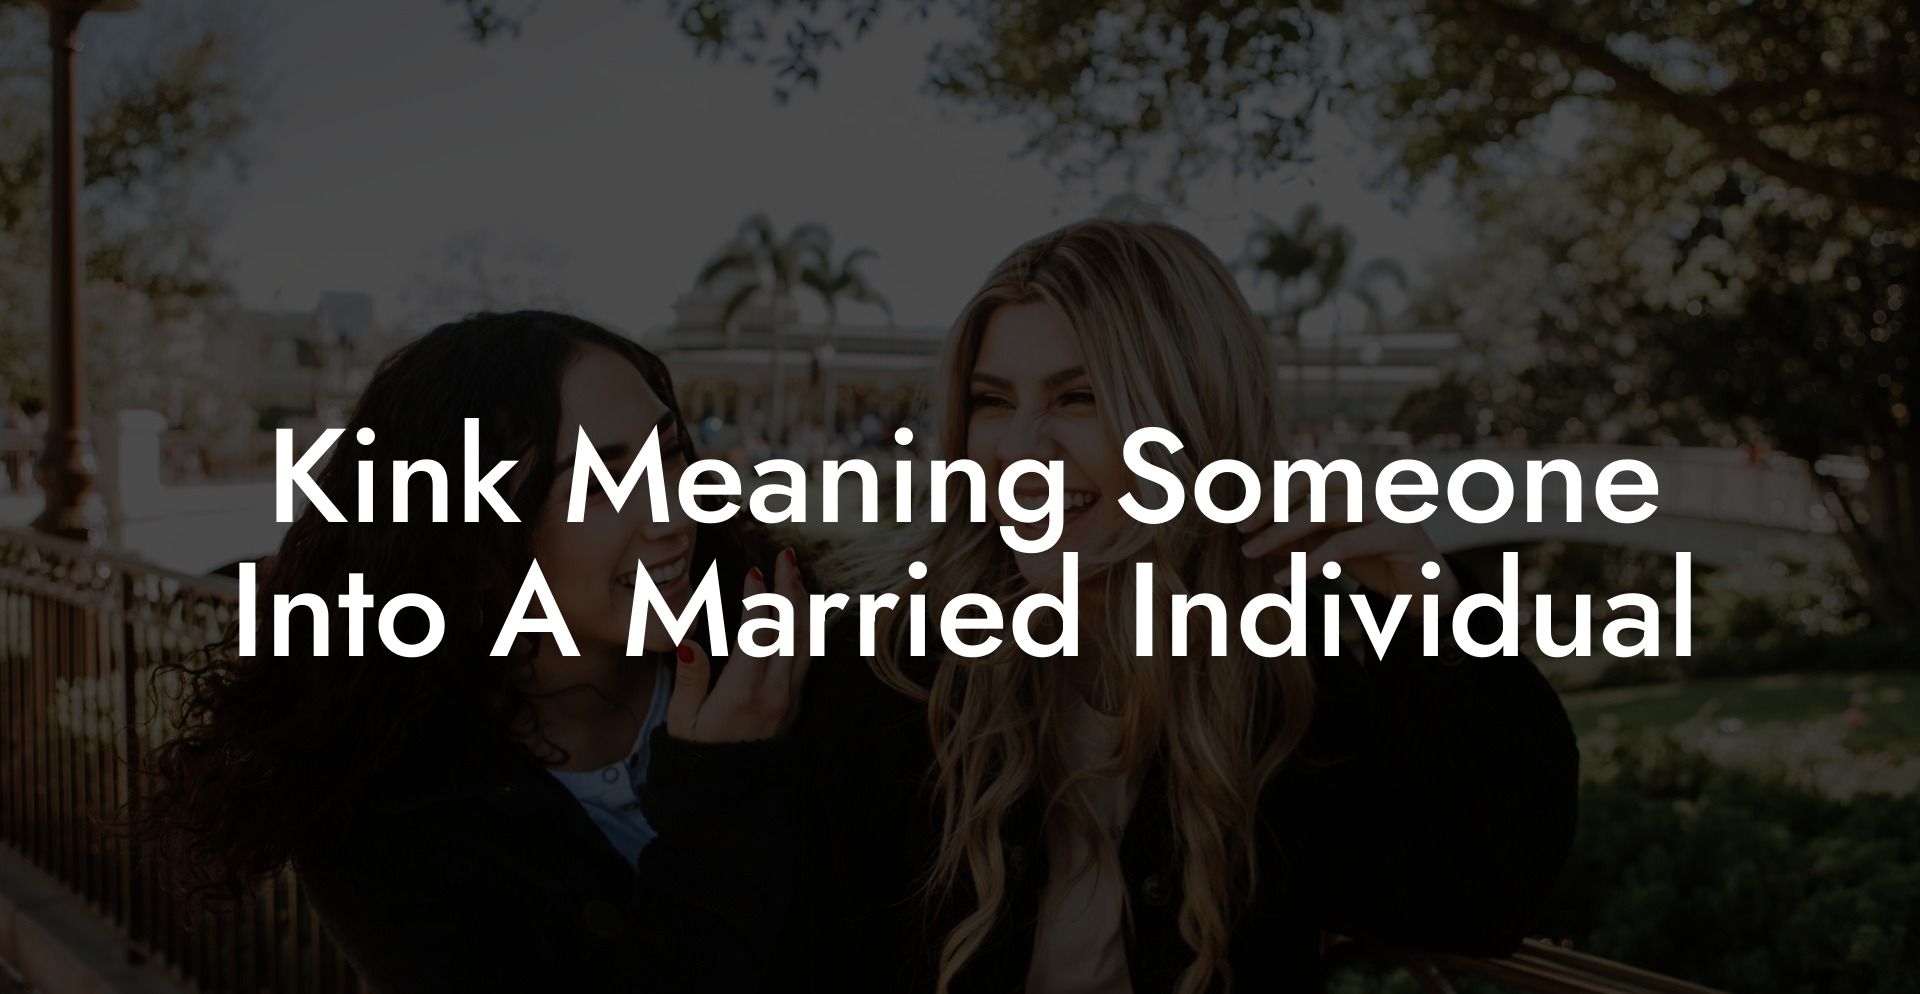 Kink Meaning Someone Into A Married Individual